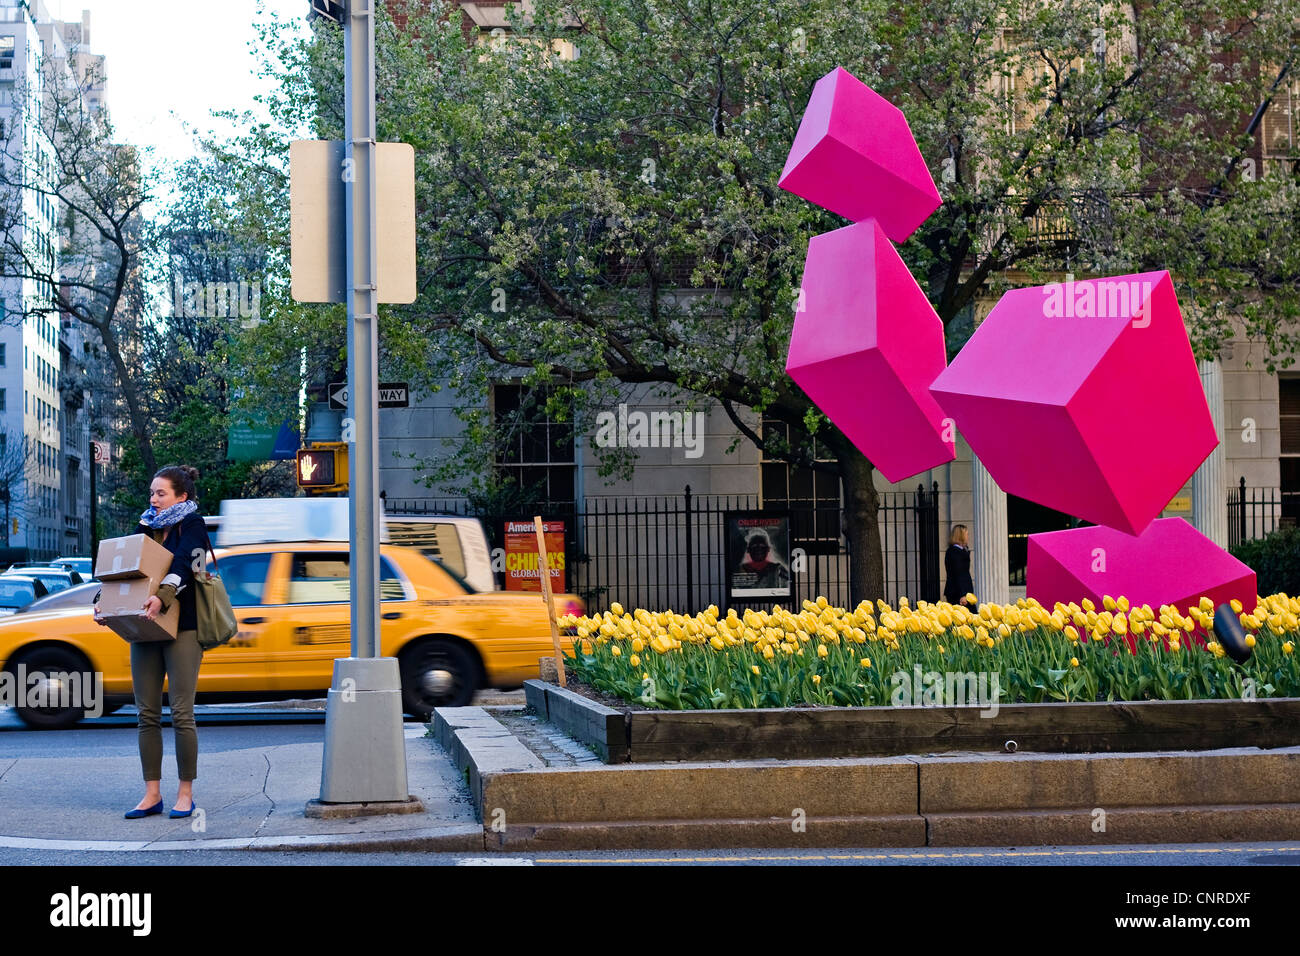 NYC Taxi drives on Park Avenue past public sculpture named Acrobatica by Rafael Barrios whilst a woman holds heavy boxes. Stock Photo